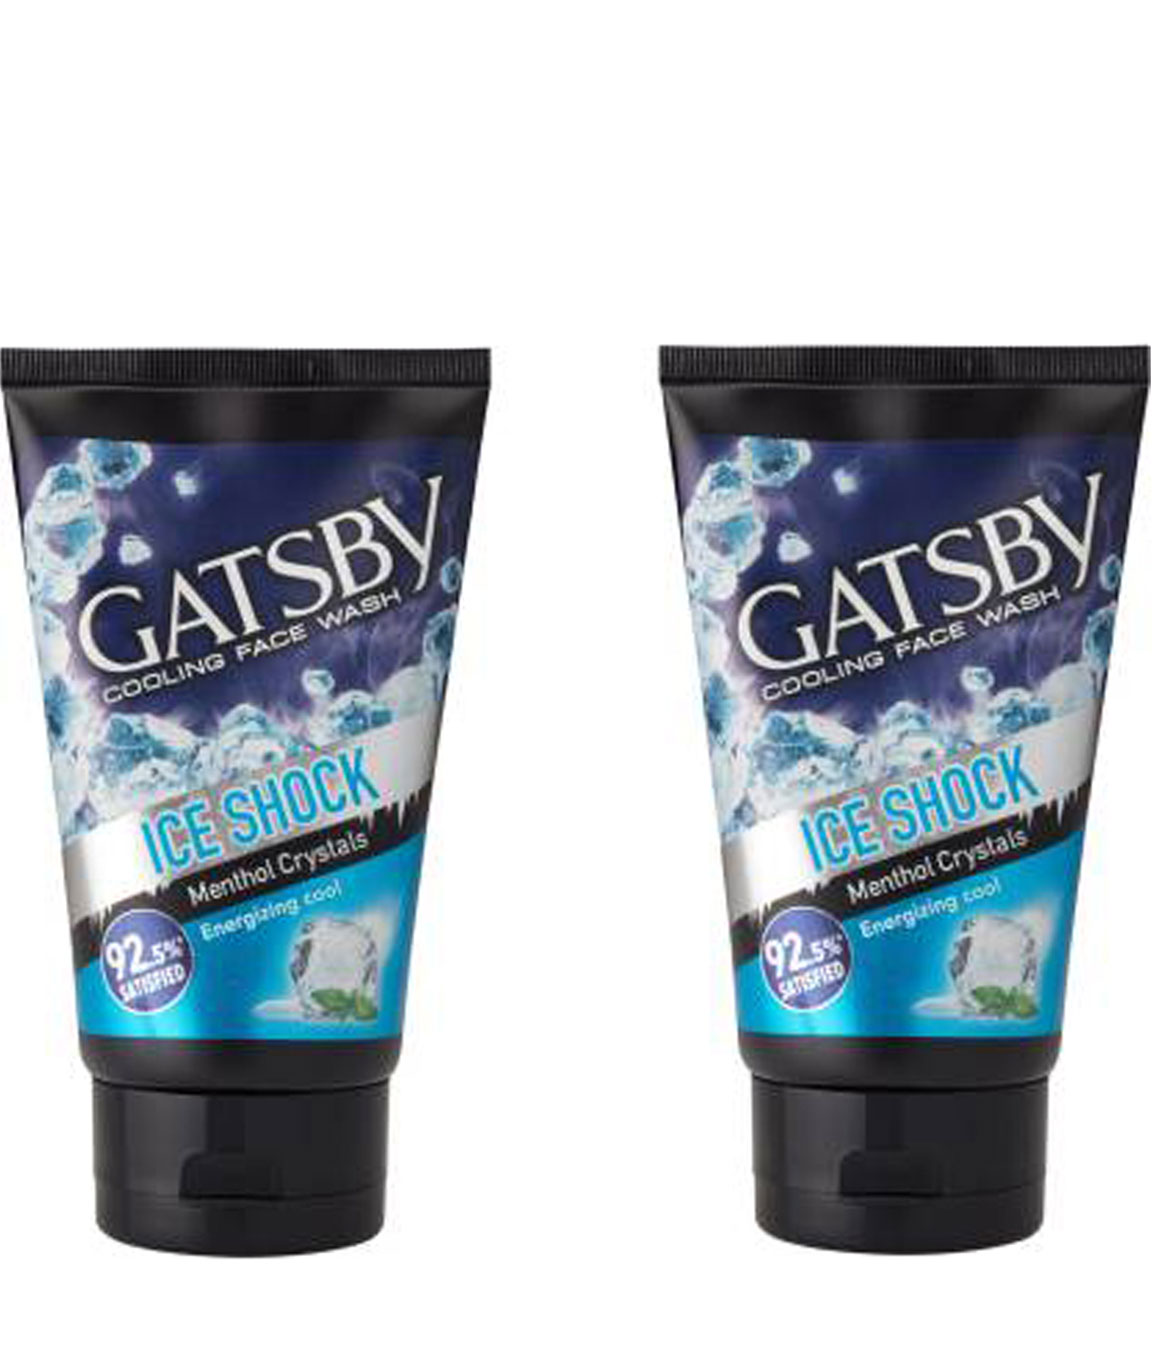 GATSBY COOLING FACE WASH ICE FREEZE FACE WASH (200 G)